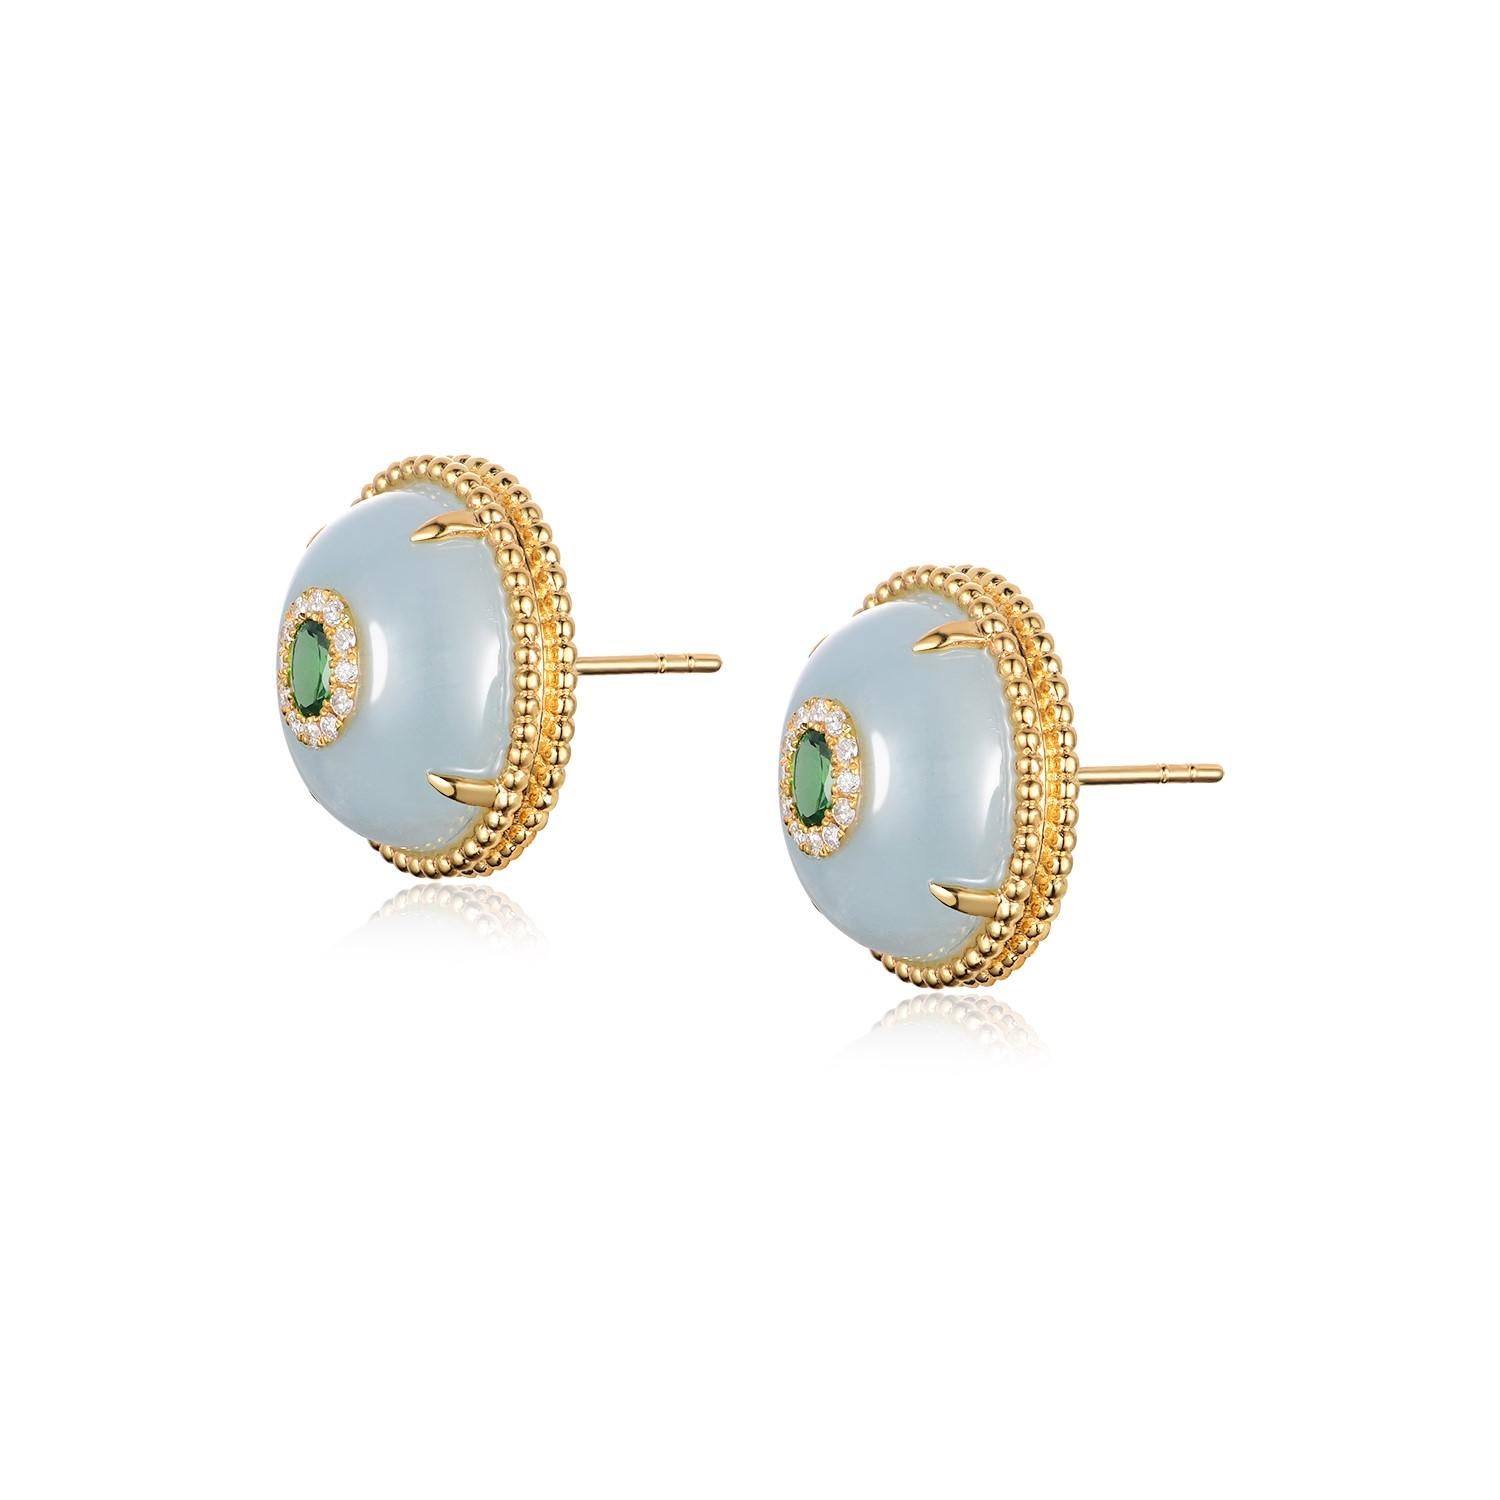 These earrings offer a serene yet captivating presence, featuring the cool elegance of 16.45 carats of aquamarine, set in 18K gold-plated sterling silver. Each aquamarine is a substantial gemstone, its tranquil blue hue reminiscent of the clear